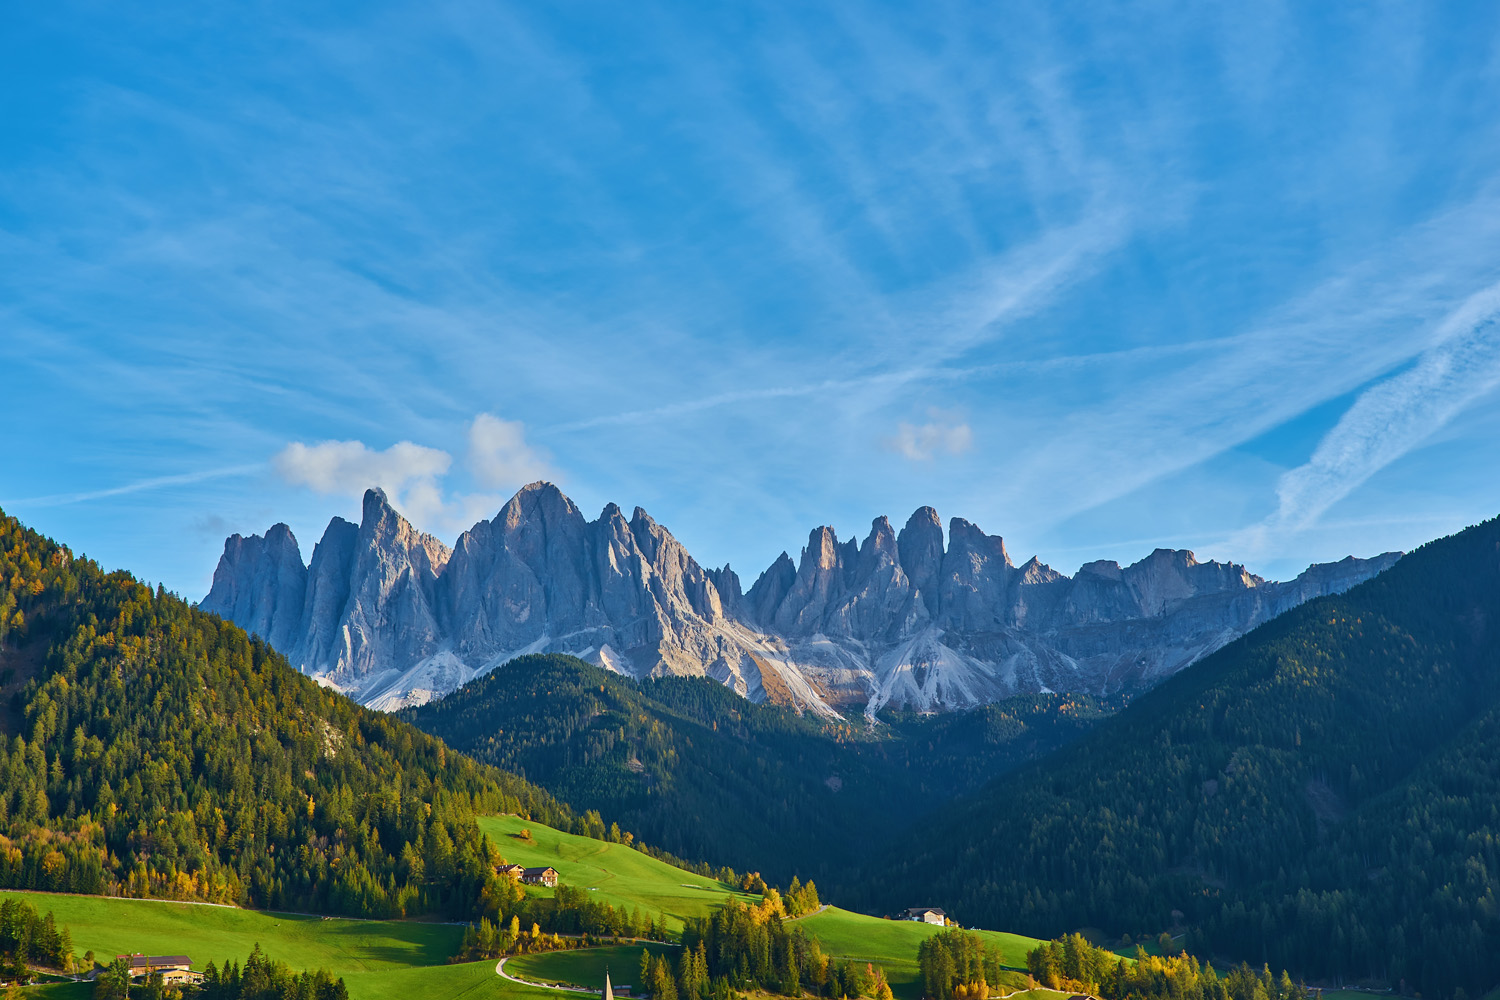 A new 7-day hiking trail has recently opened in the breathtaking Dolomites mountains of Italy